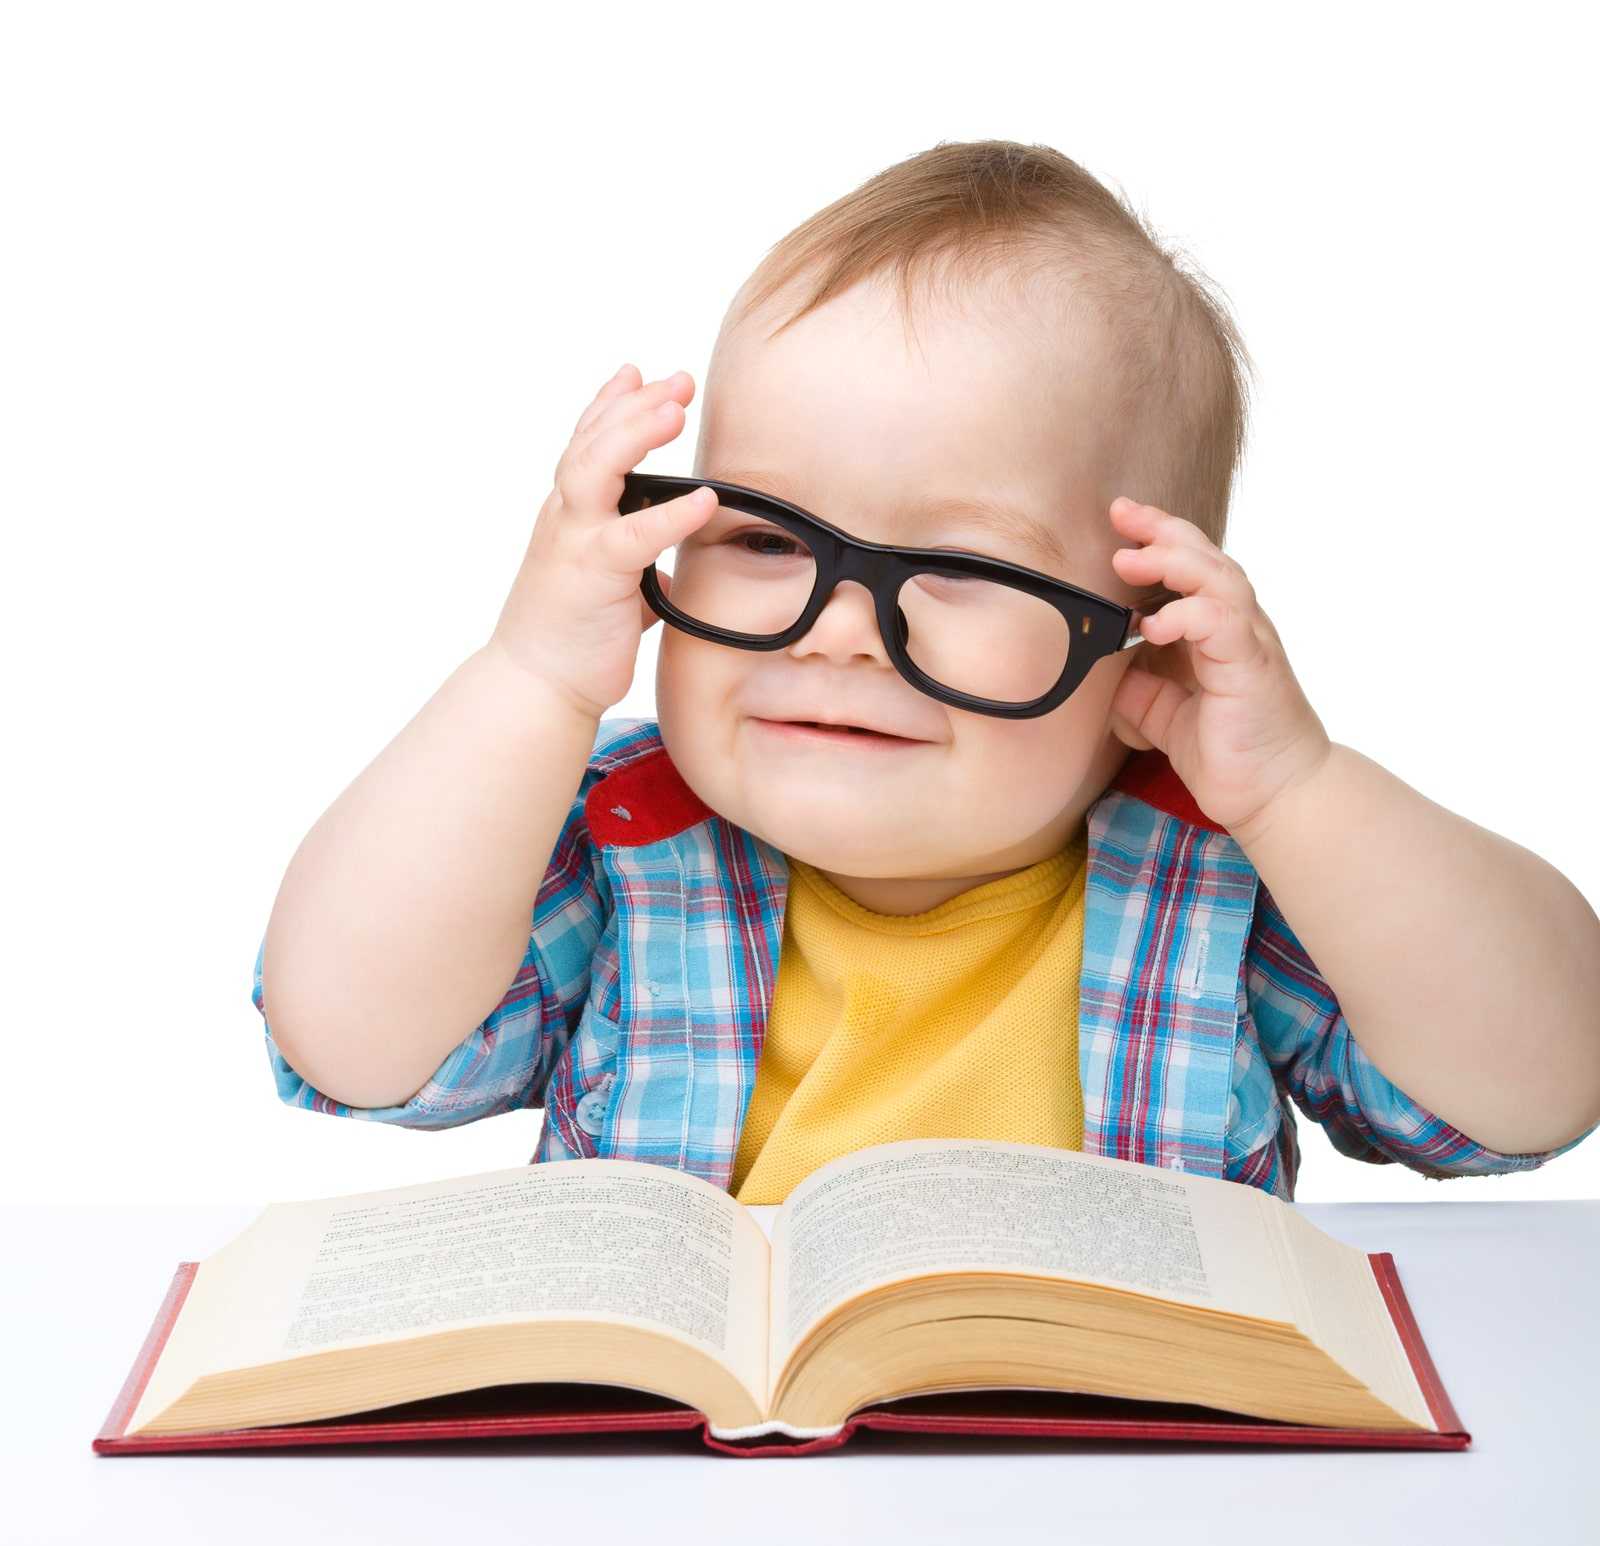 Little Child Play With Book And Glasses